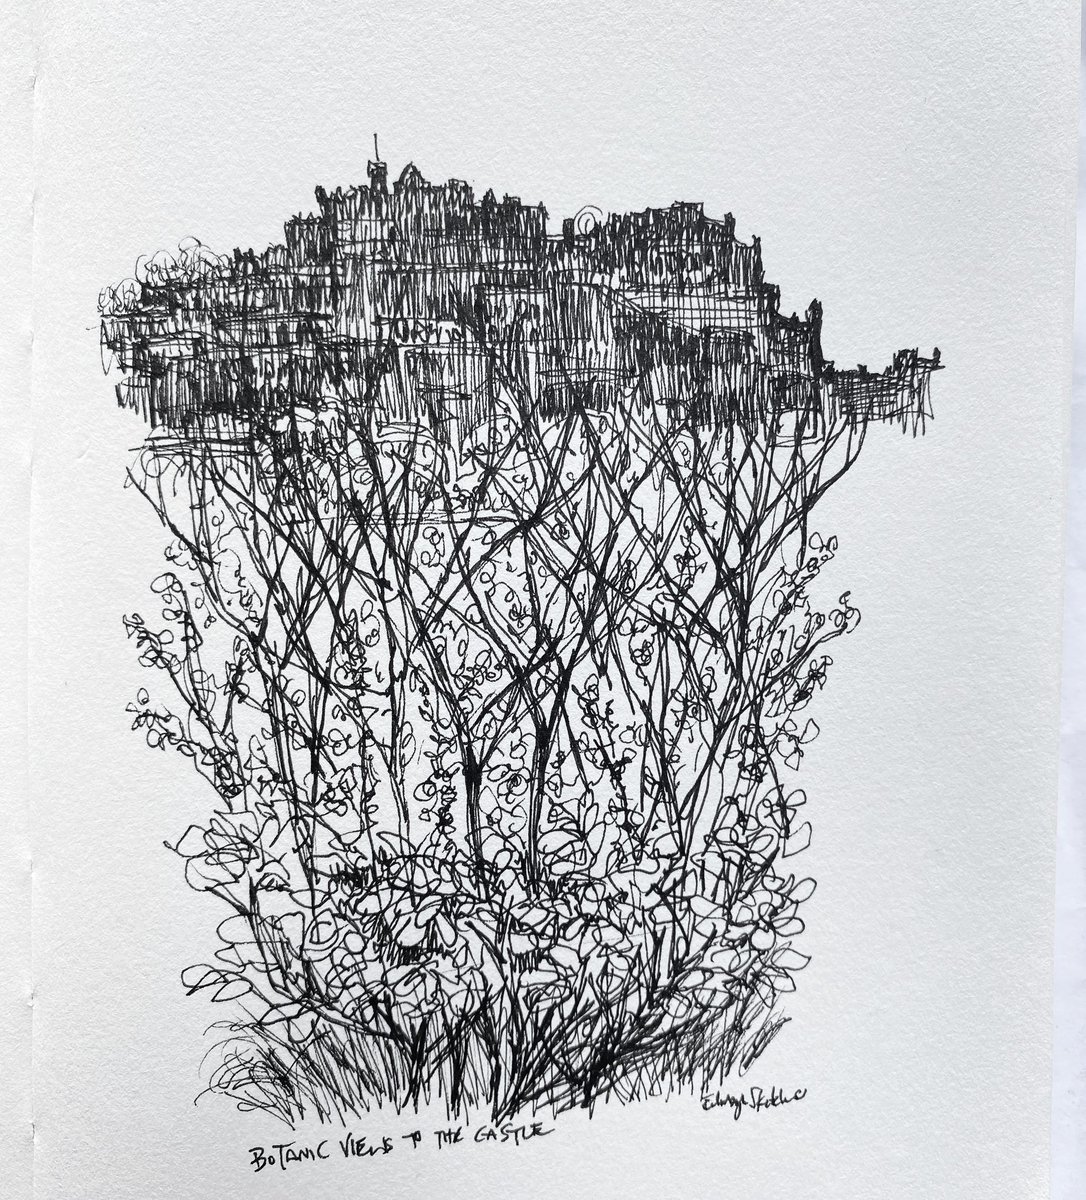 Another from yesterdays trip to the #botanics #edinburghcastle in the distance. Quite like the black ink only version before I added the wash. May make this a print if anyone’s interested ?!

#edinburgh #sketcher